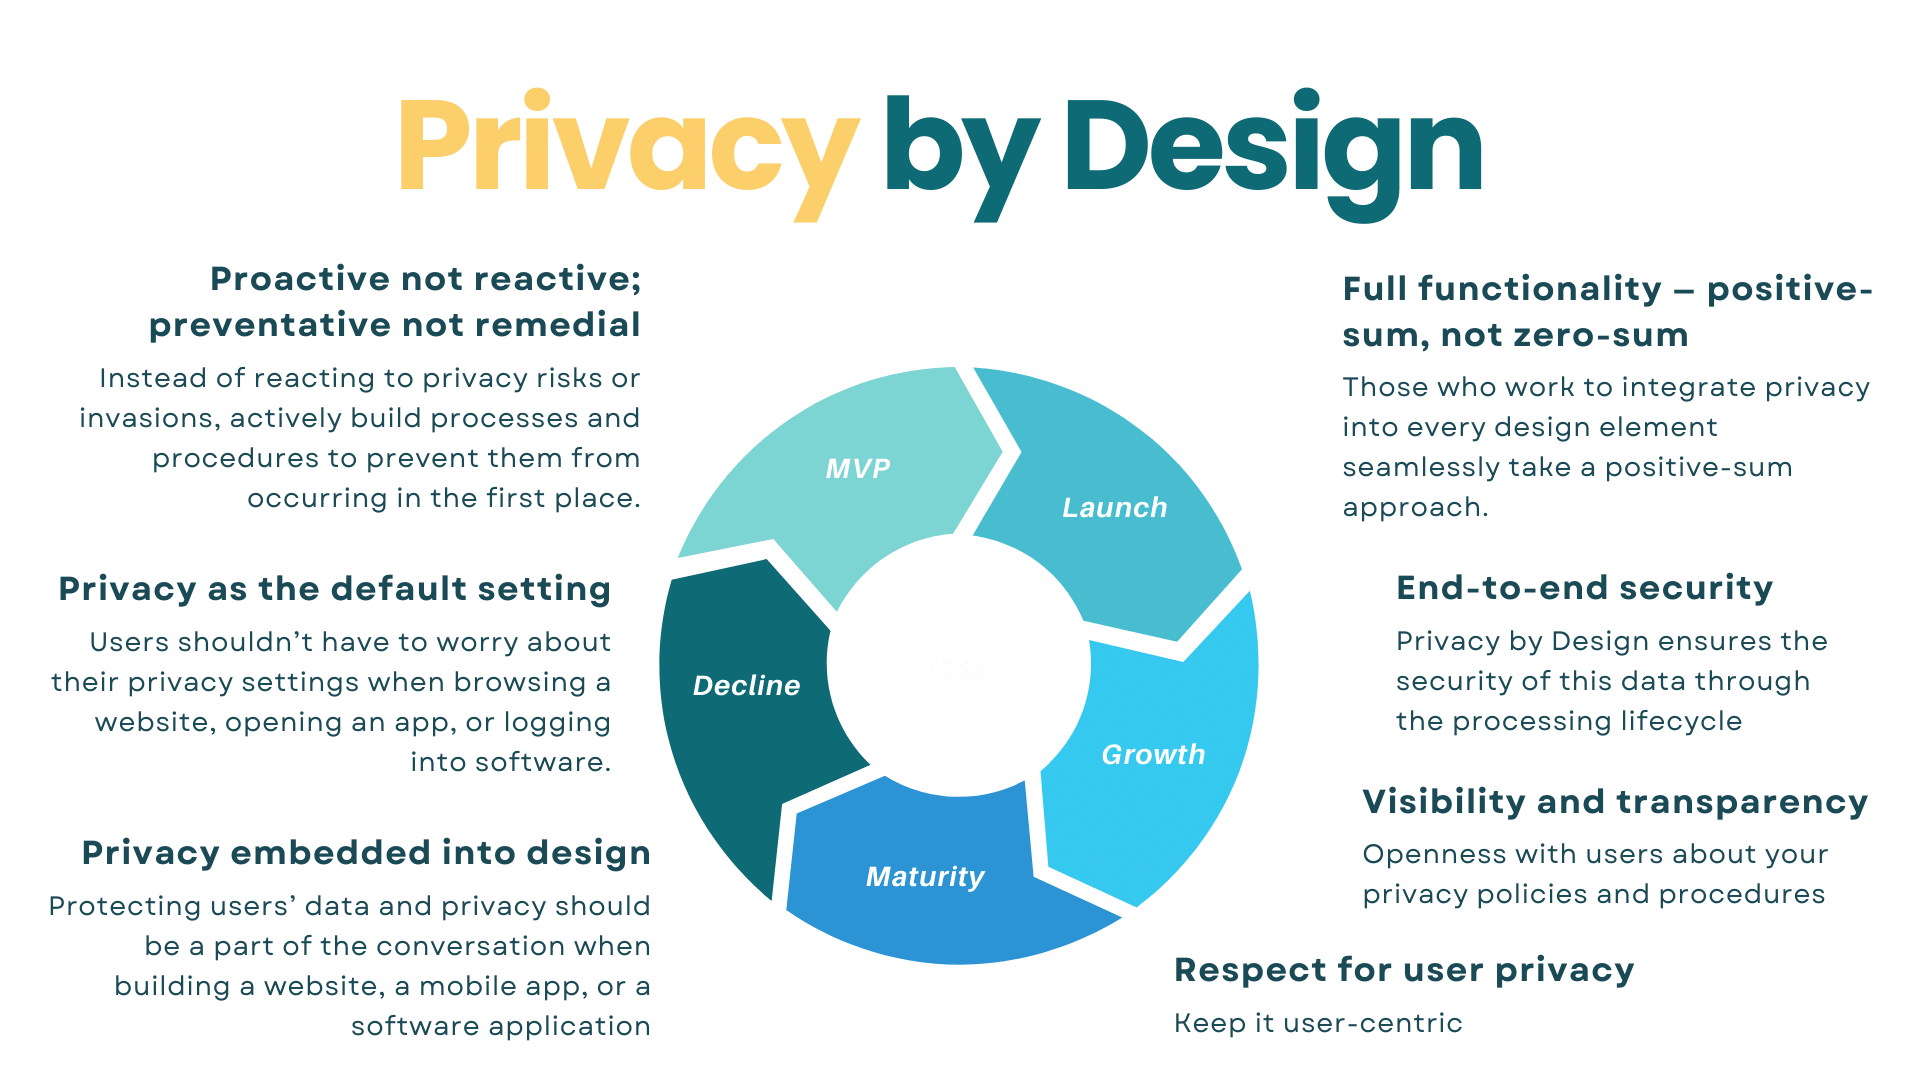 privacy by design